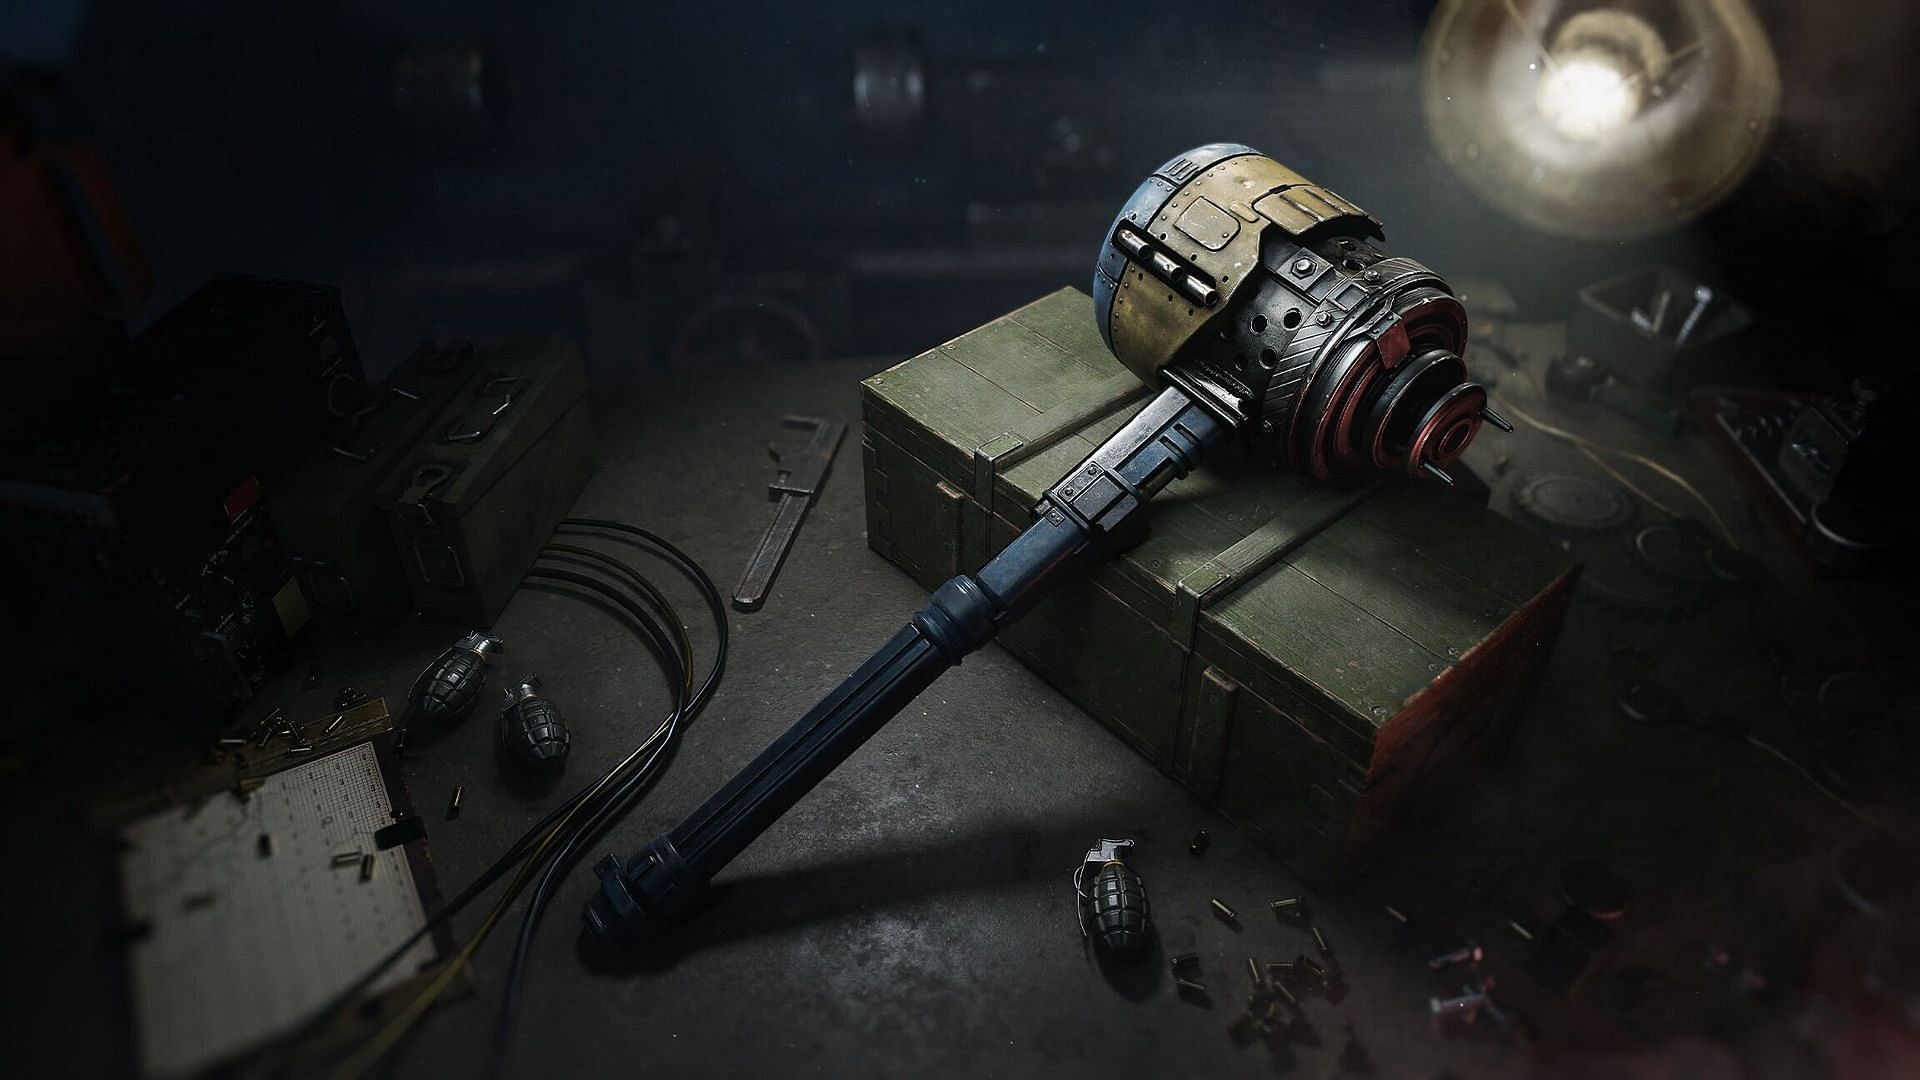 Sledgehammer Melee weapon (Image Via Activision)